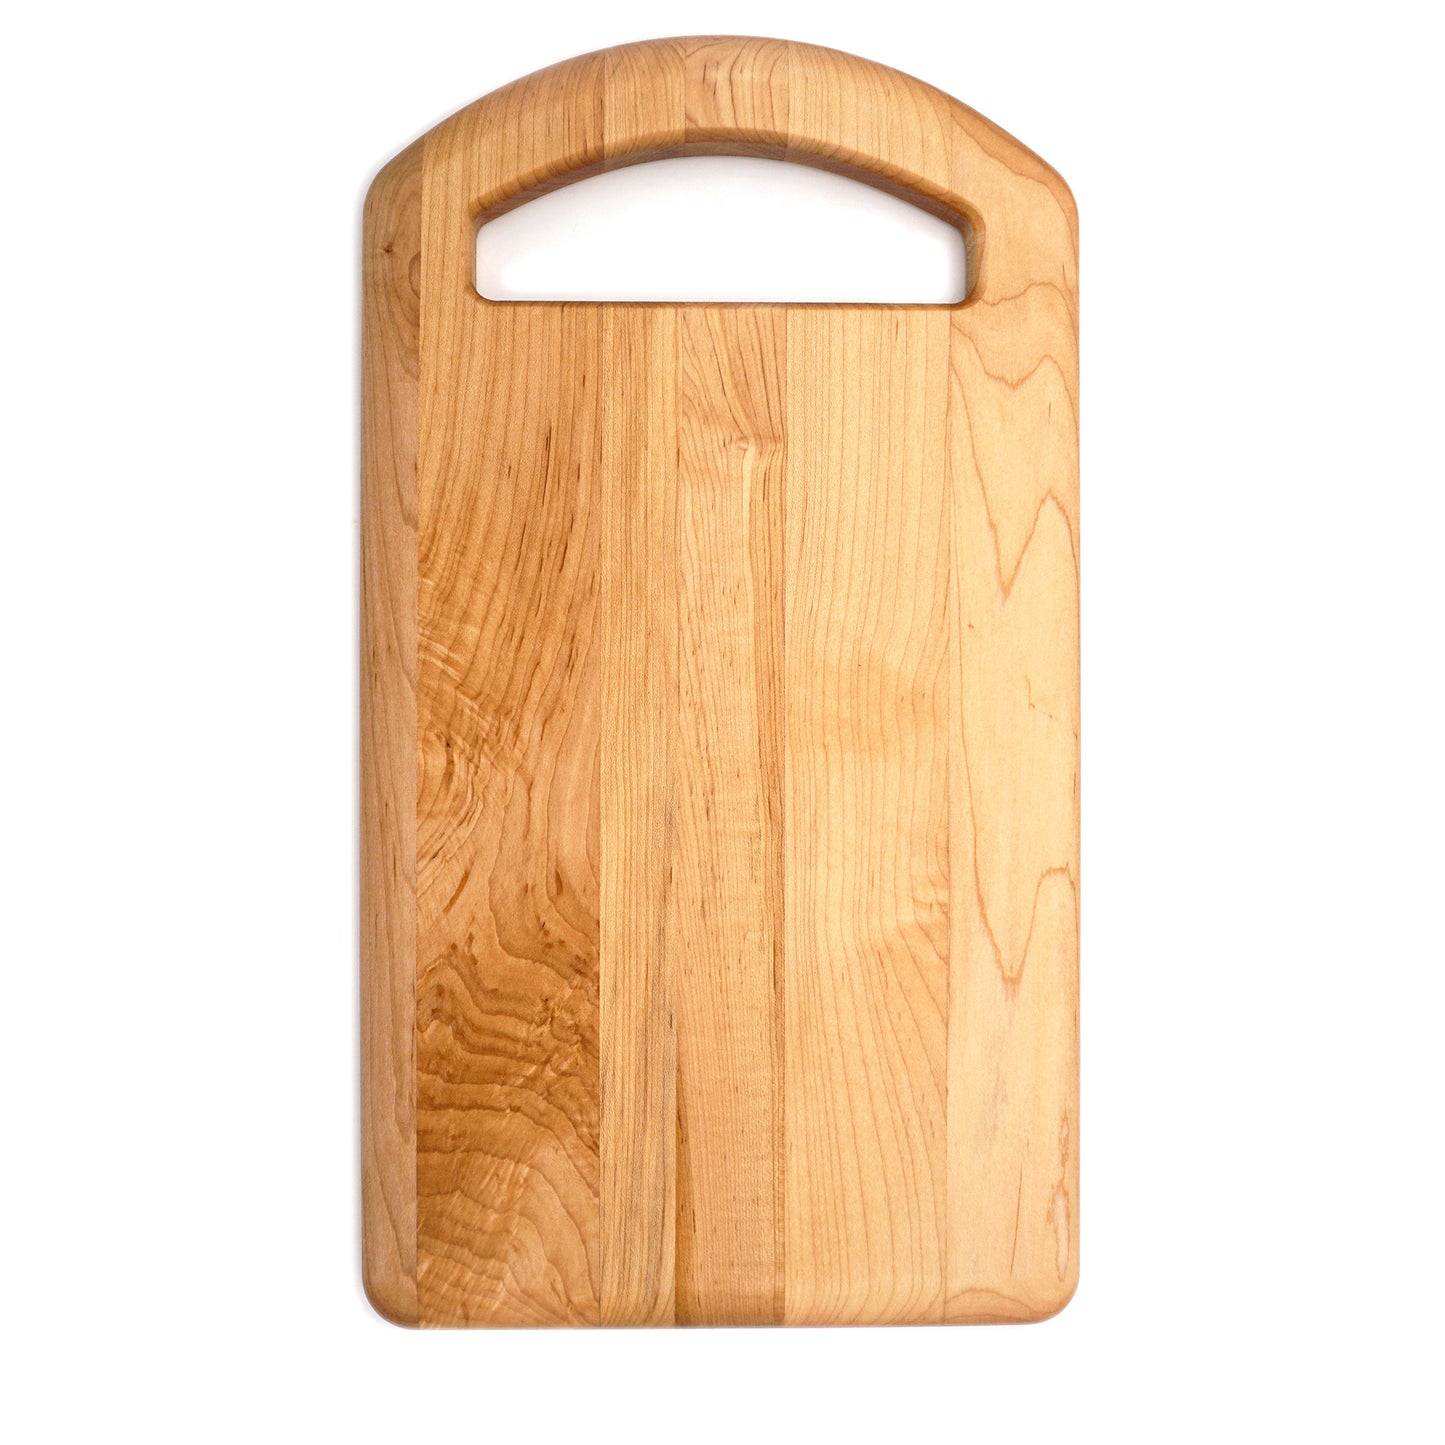 Maple Prep Board with Oval Handle-18" x 10"